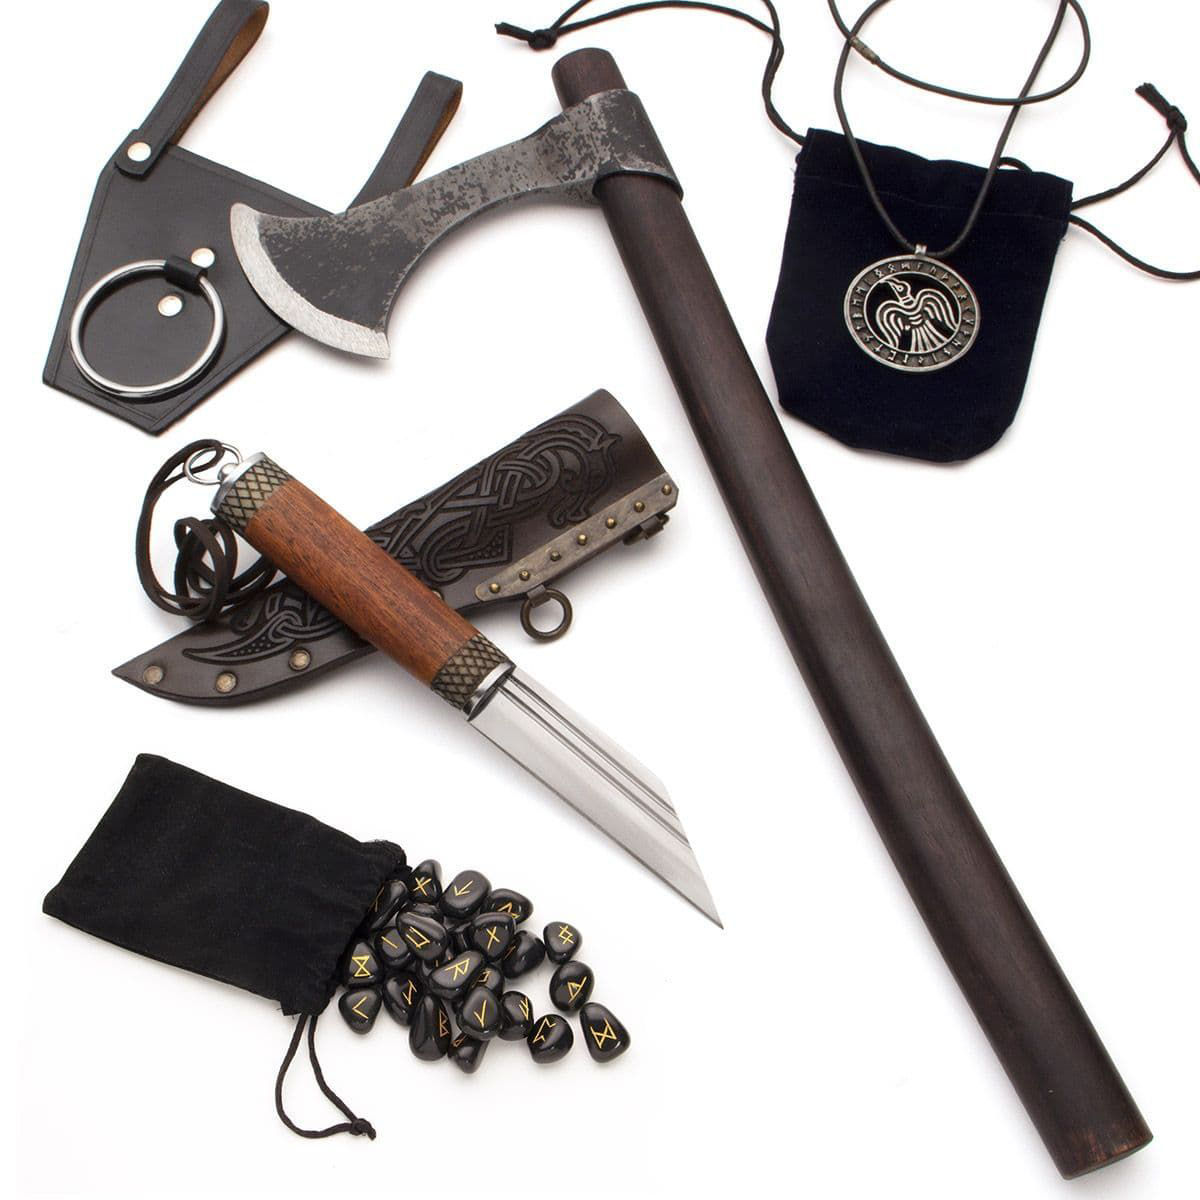 Viking Truth Seeker kit includes Casting Stones, pewter raven pendant, Huntsman's Hadseax, Francesca axe, and leather axe holder